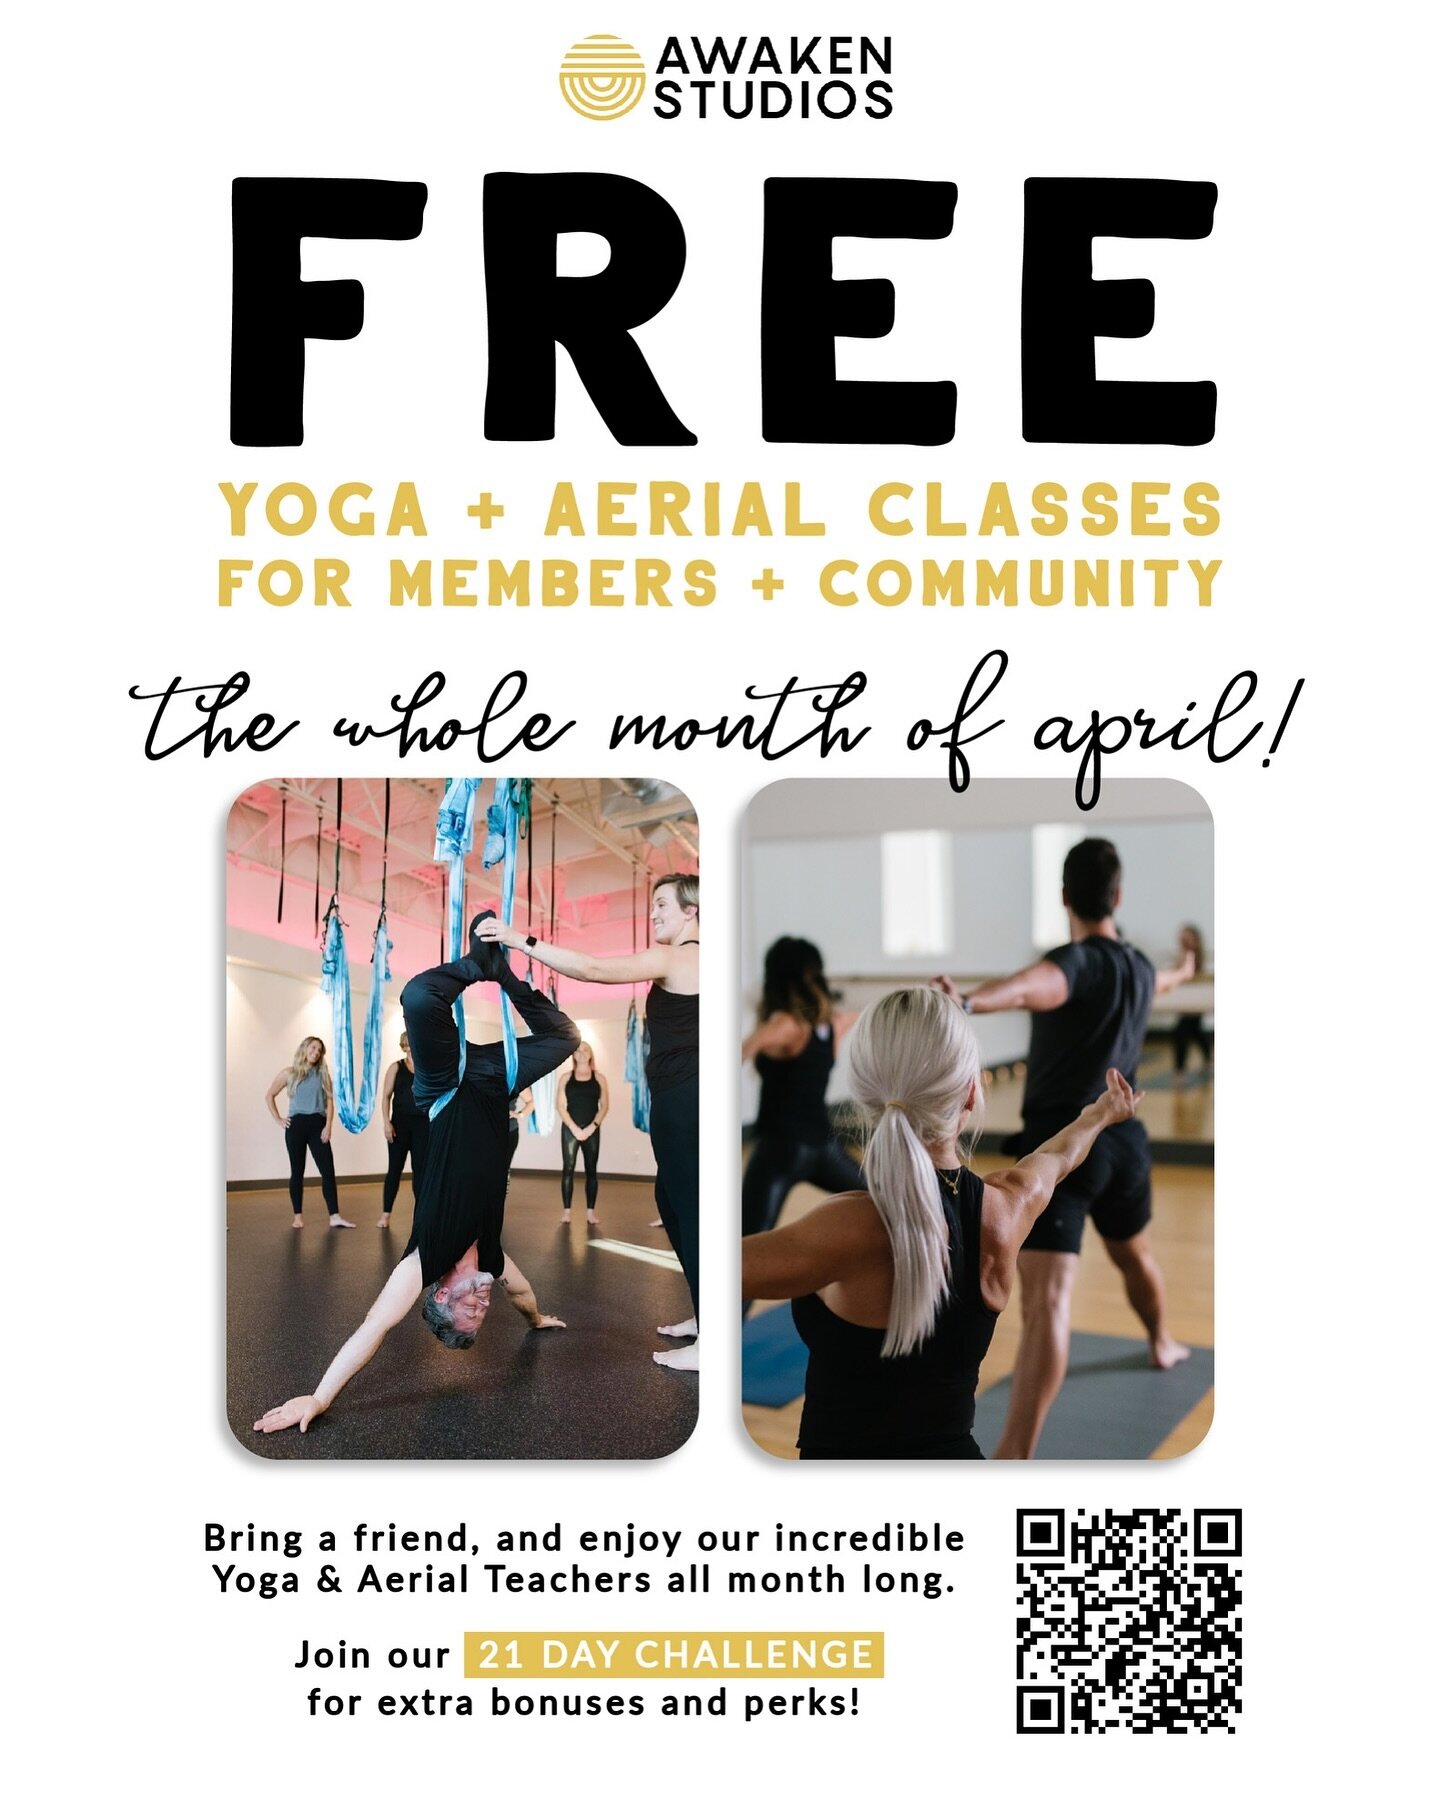 Our Awaken &amp; Refine
Mini Challenge Begins APRIL 1st!
 
You DID read that correctly. The whole month of April FREE to anyone that wants to join any of our incredible Yoga &amp; Aerial Fitness Classes! In Addition, Join the 21 day challenge and exp